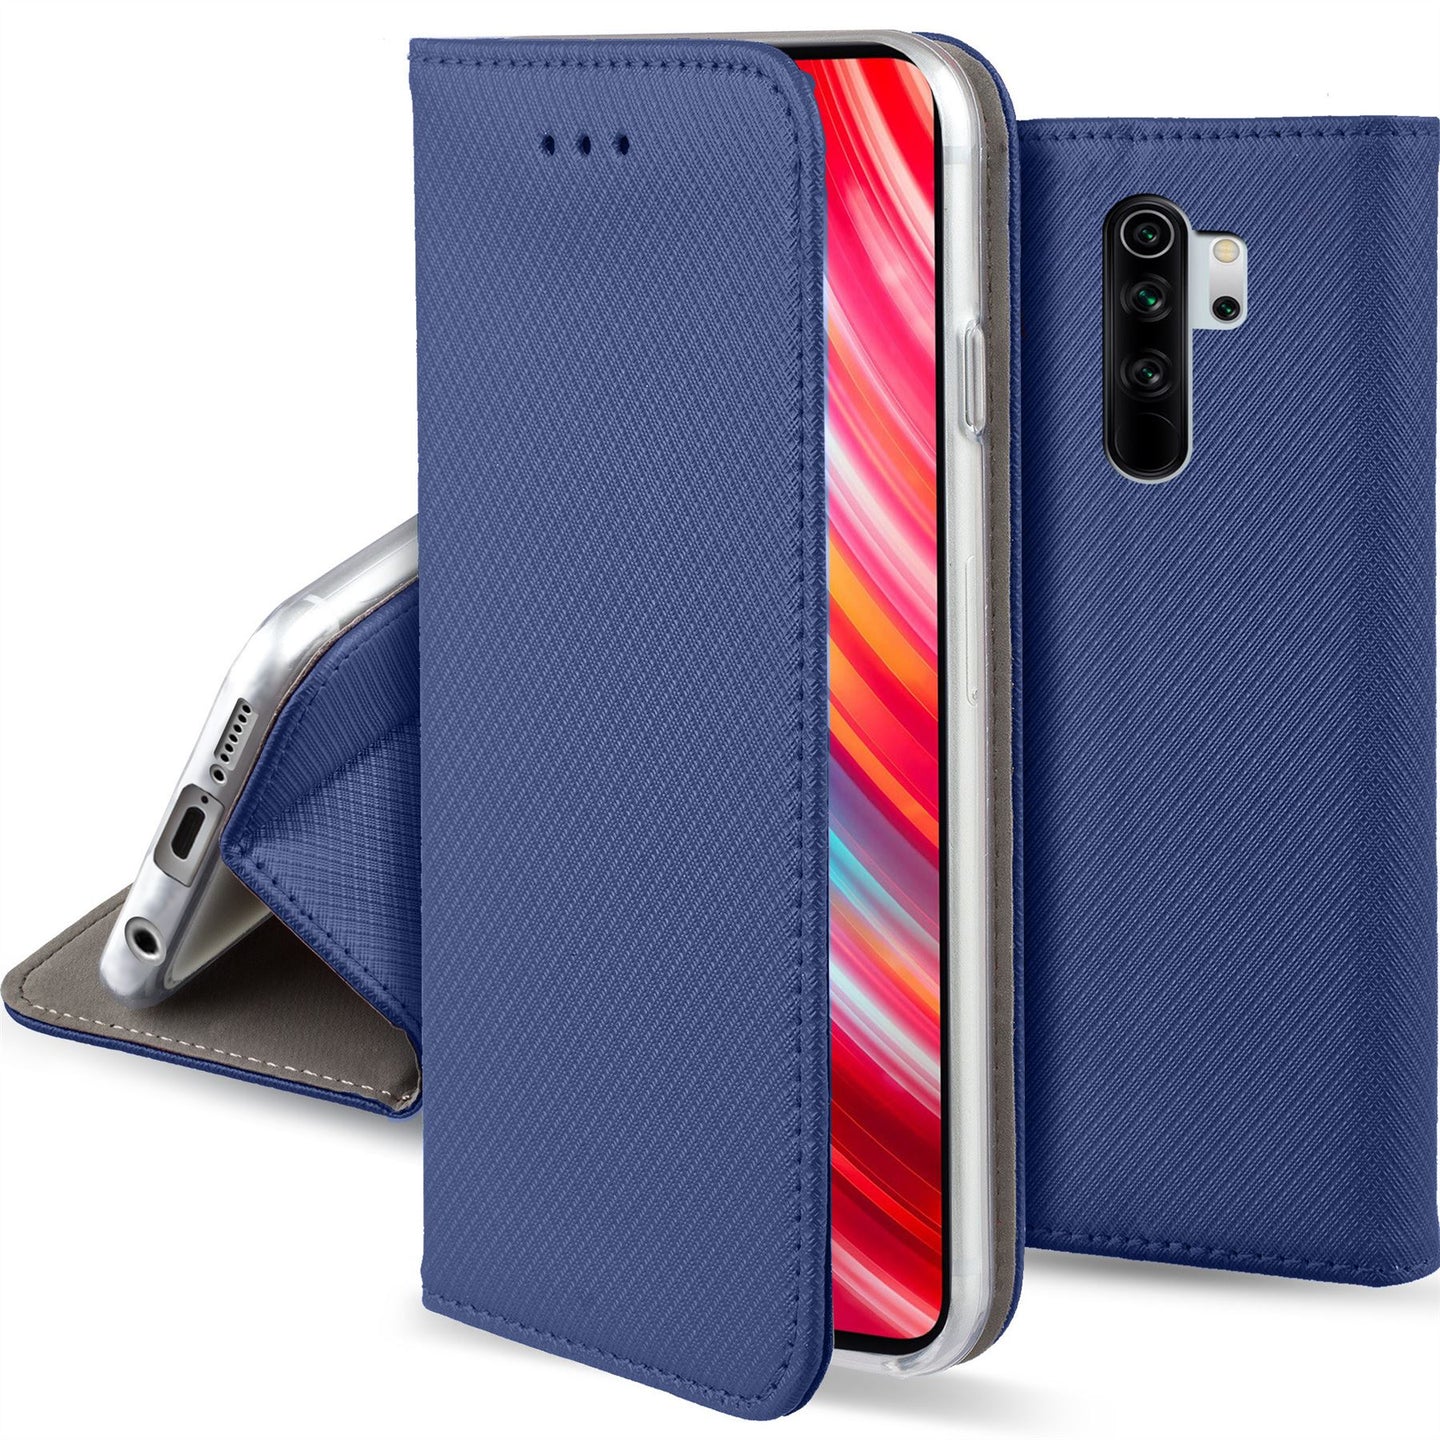 Moozy Case Flip Cover for Xiaomi Redmi Note 8 Pro, Dark Blue - Smart Magnetic Flip Case with Card Holder and Stand